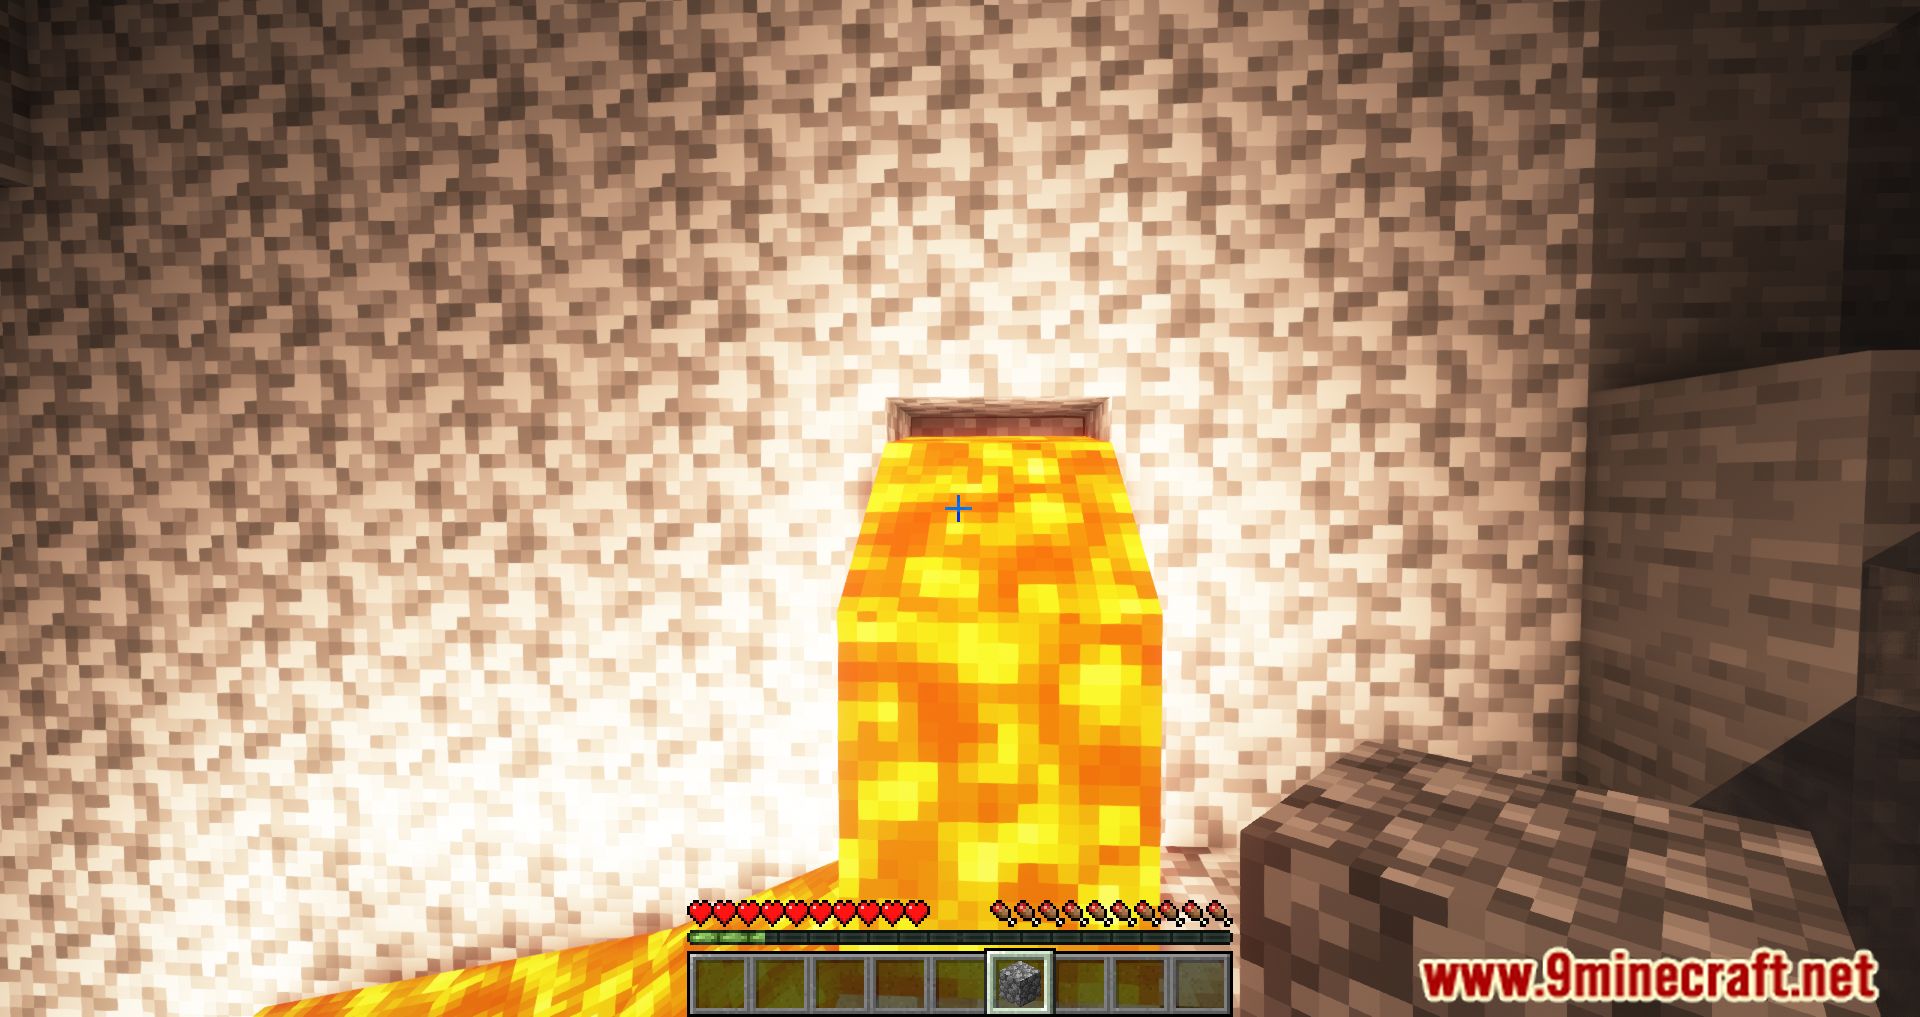 Cannot Build Over Lava Source Blocks Mod (1.20.1, 1.19.4) - More Complex And Challenging 2